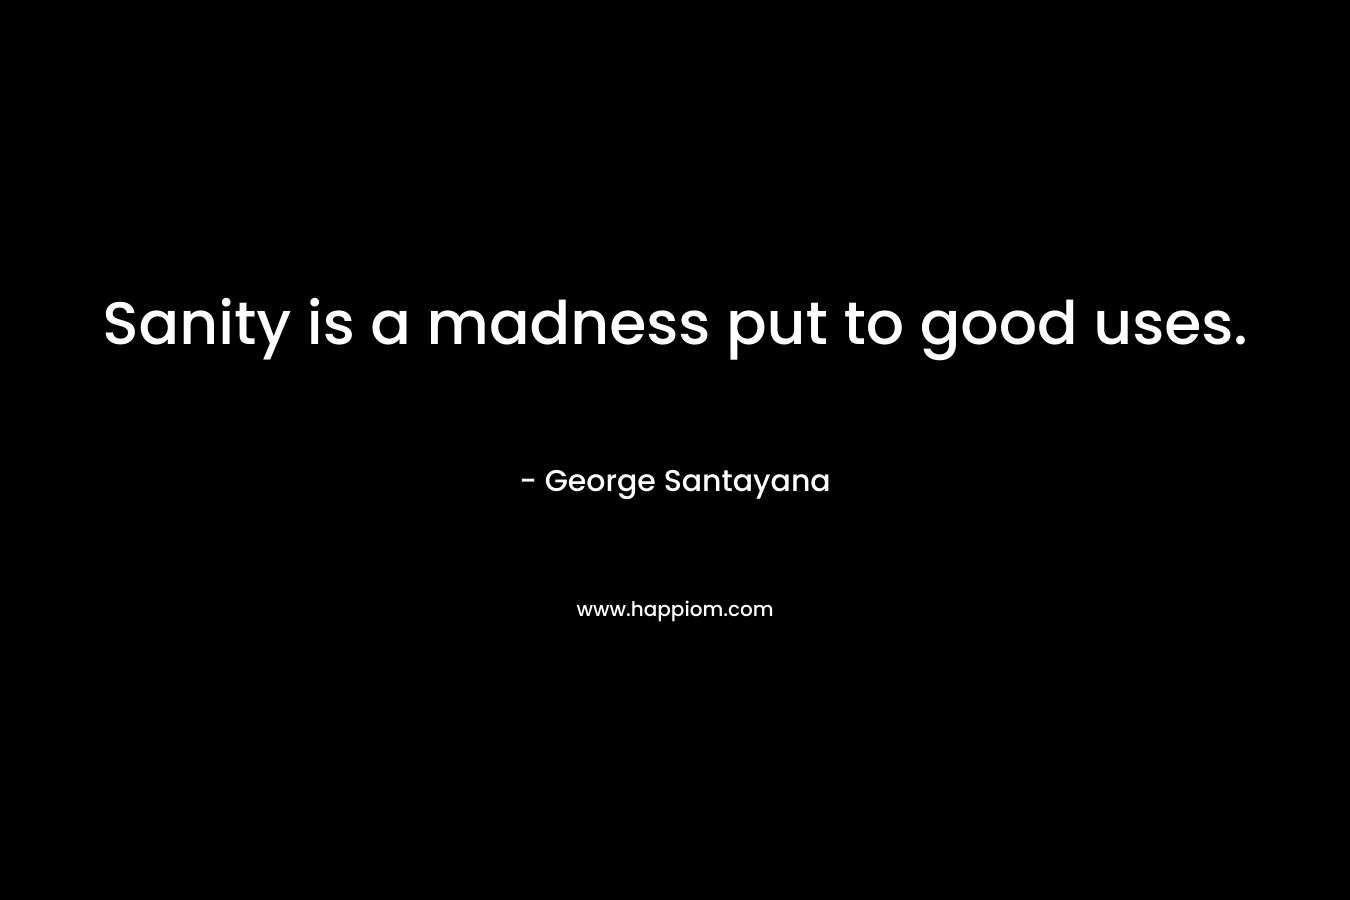 Sanity is a madness put to good uses. – George Santayana